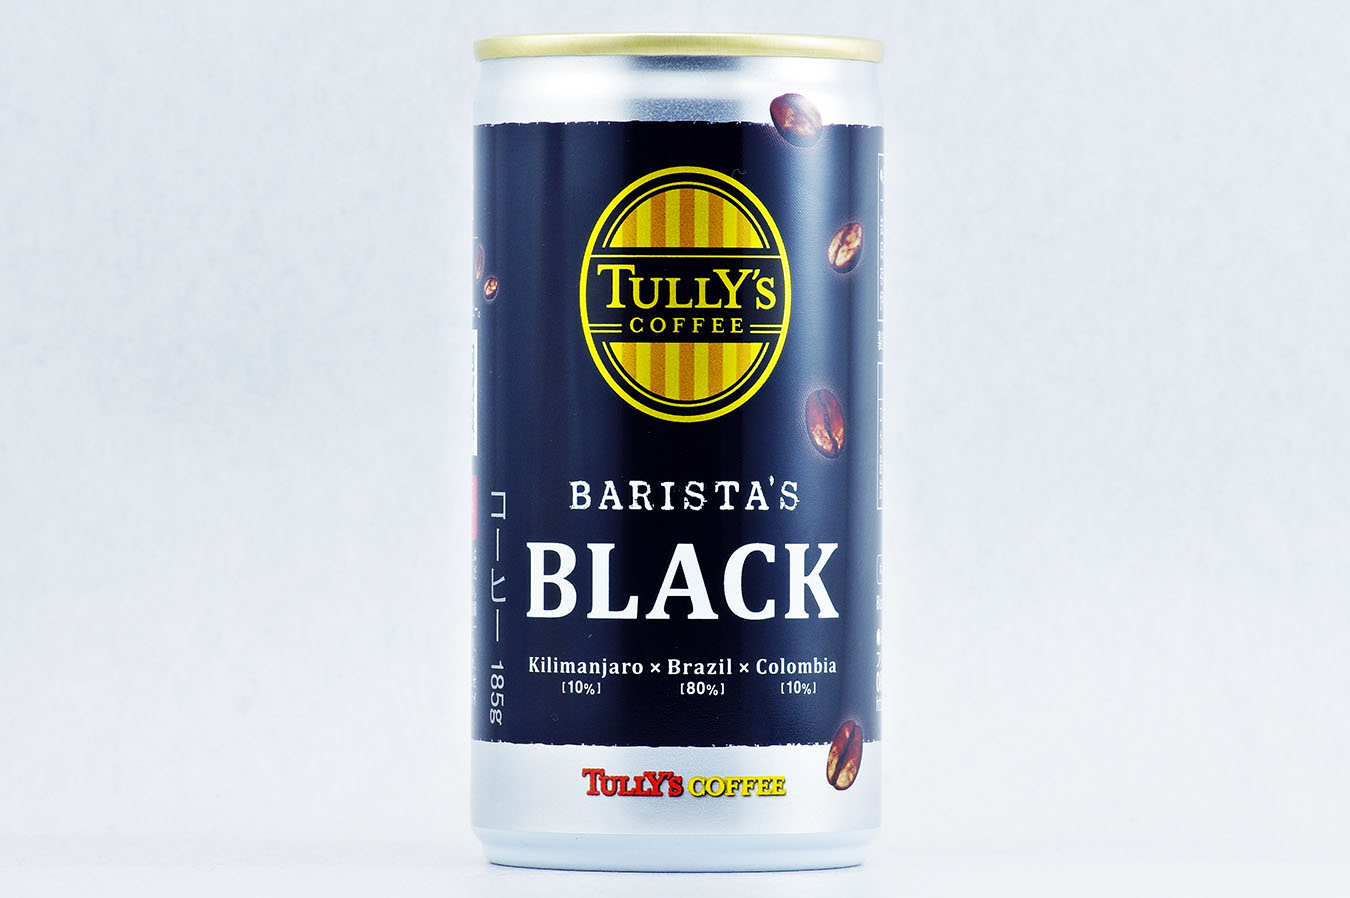 TULLY'S COFFEE BARISTA'S BLACK 185g缶 2015年11月